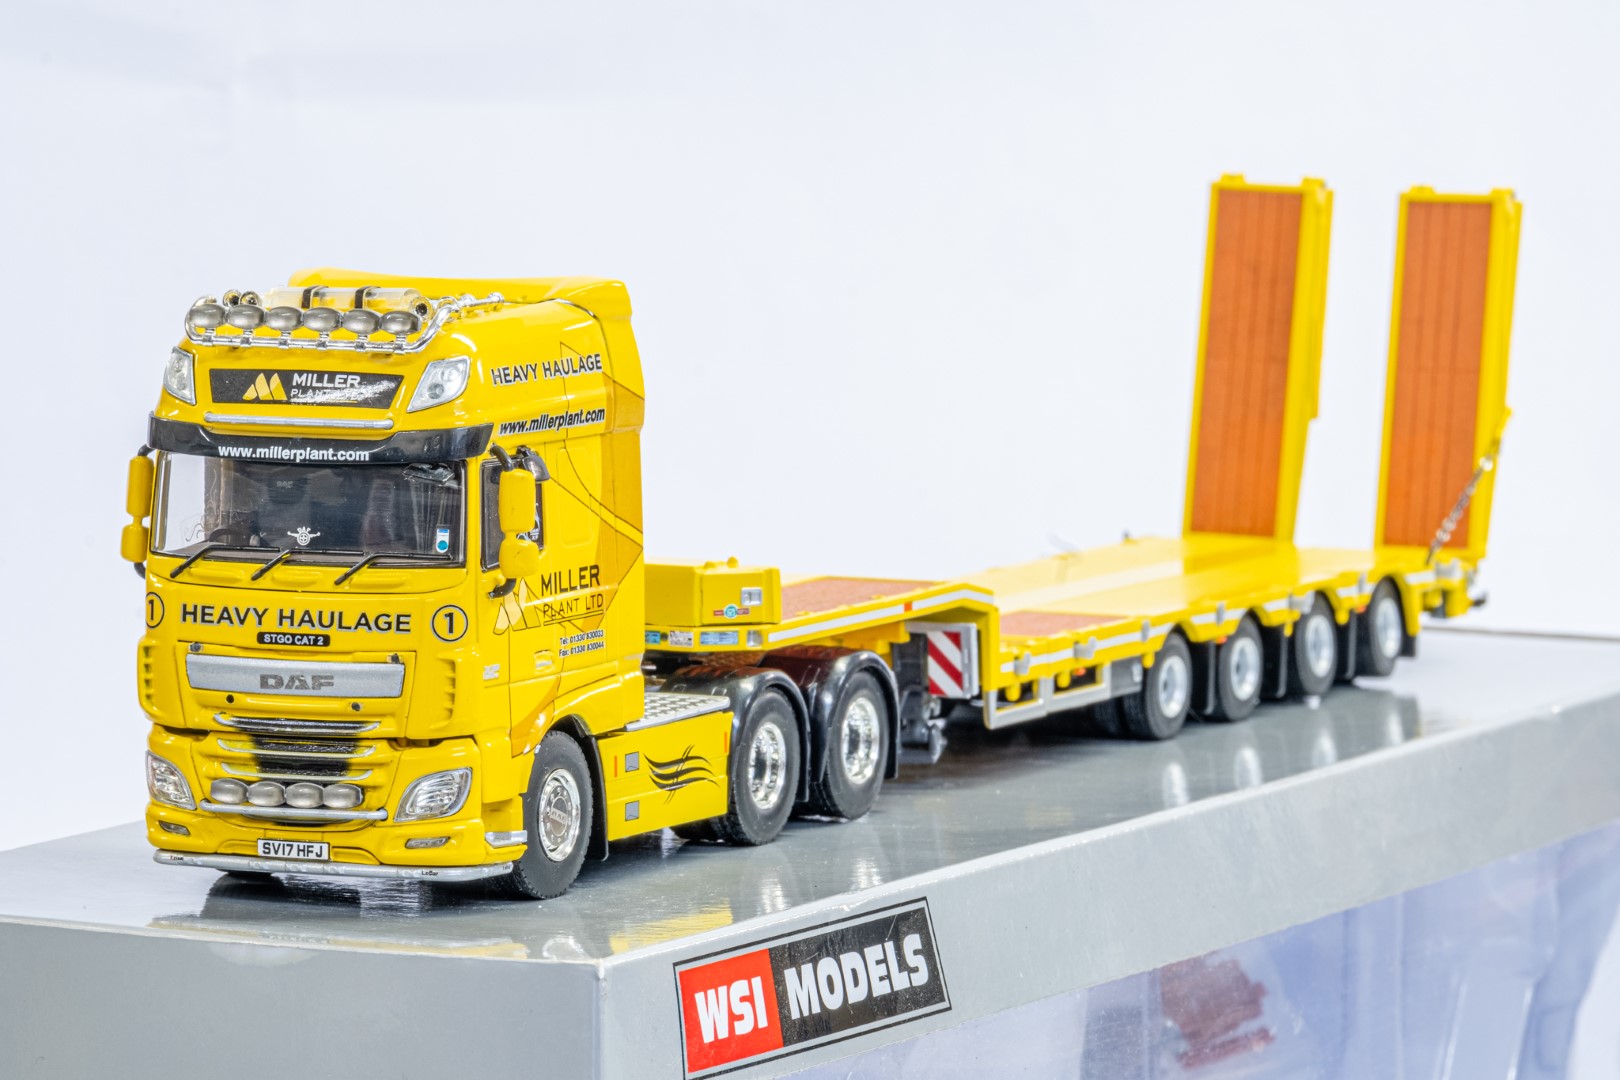 WSI DAF XF SSC 6x4 4 Axle Low Loader Trailer - Miller Plant - Image 4 of 7